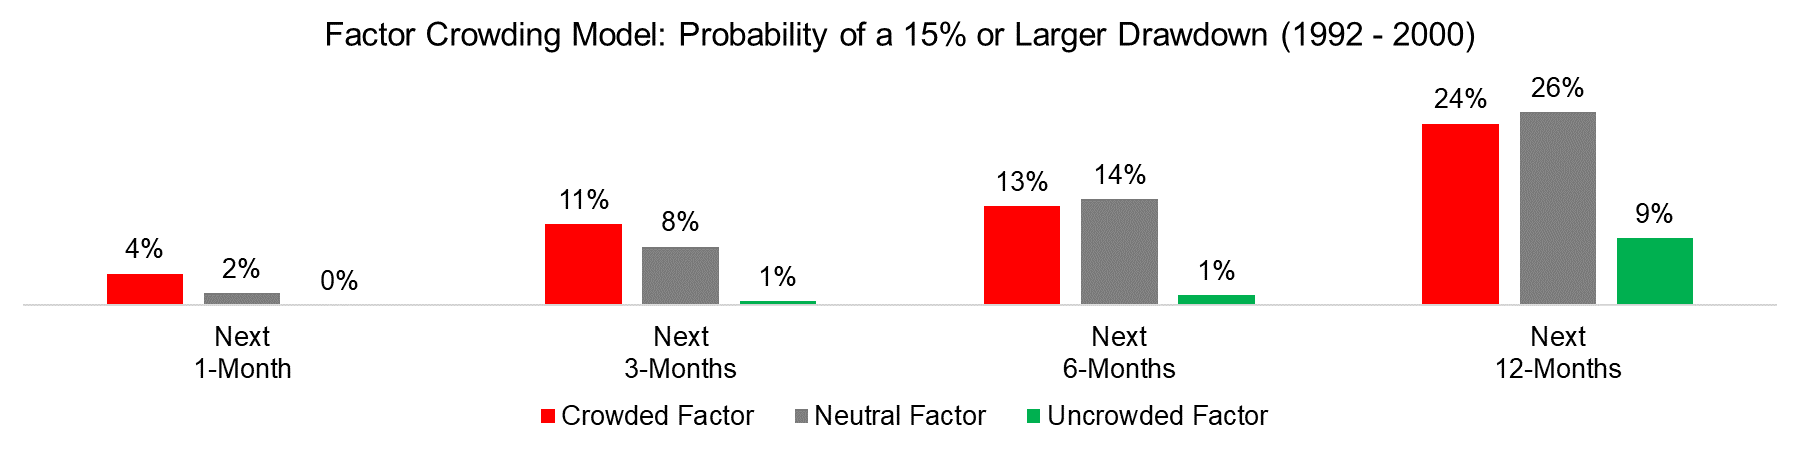 Factor Crowding Model Probability of a 15% or Larger Drawdown (1992 - 2000)